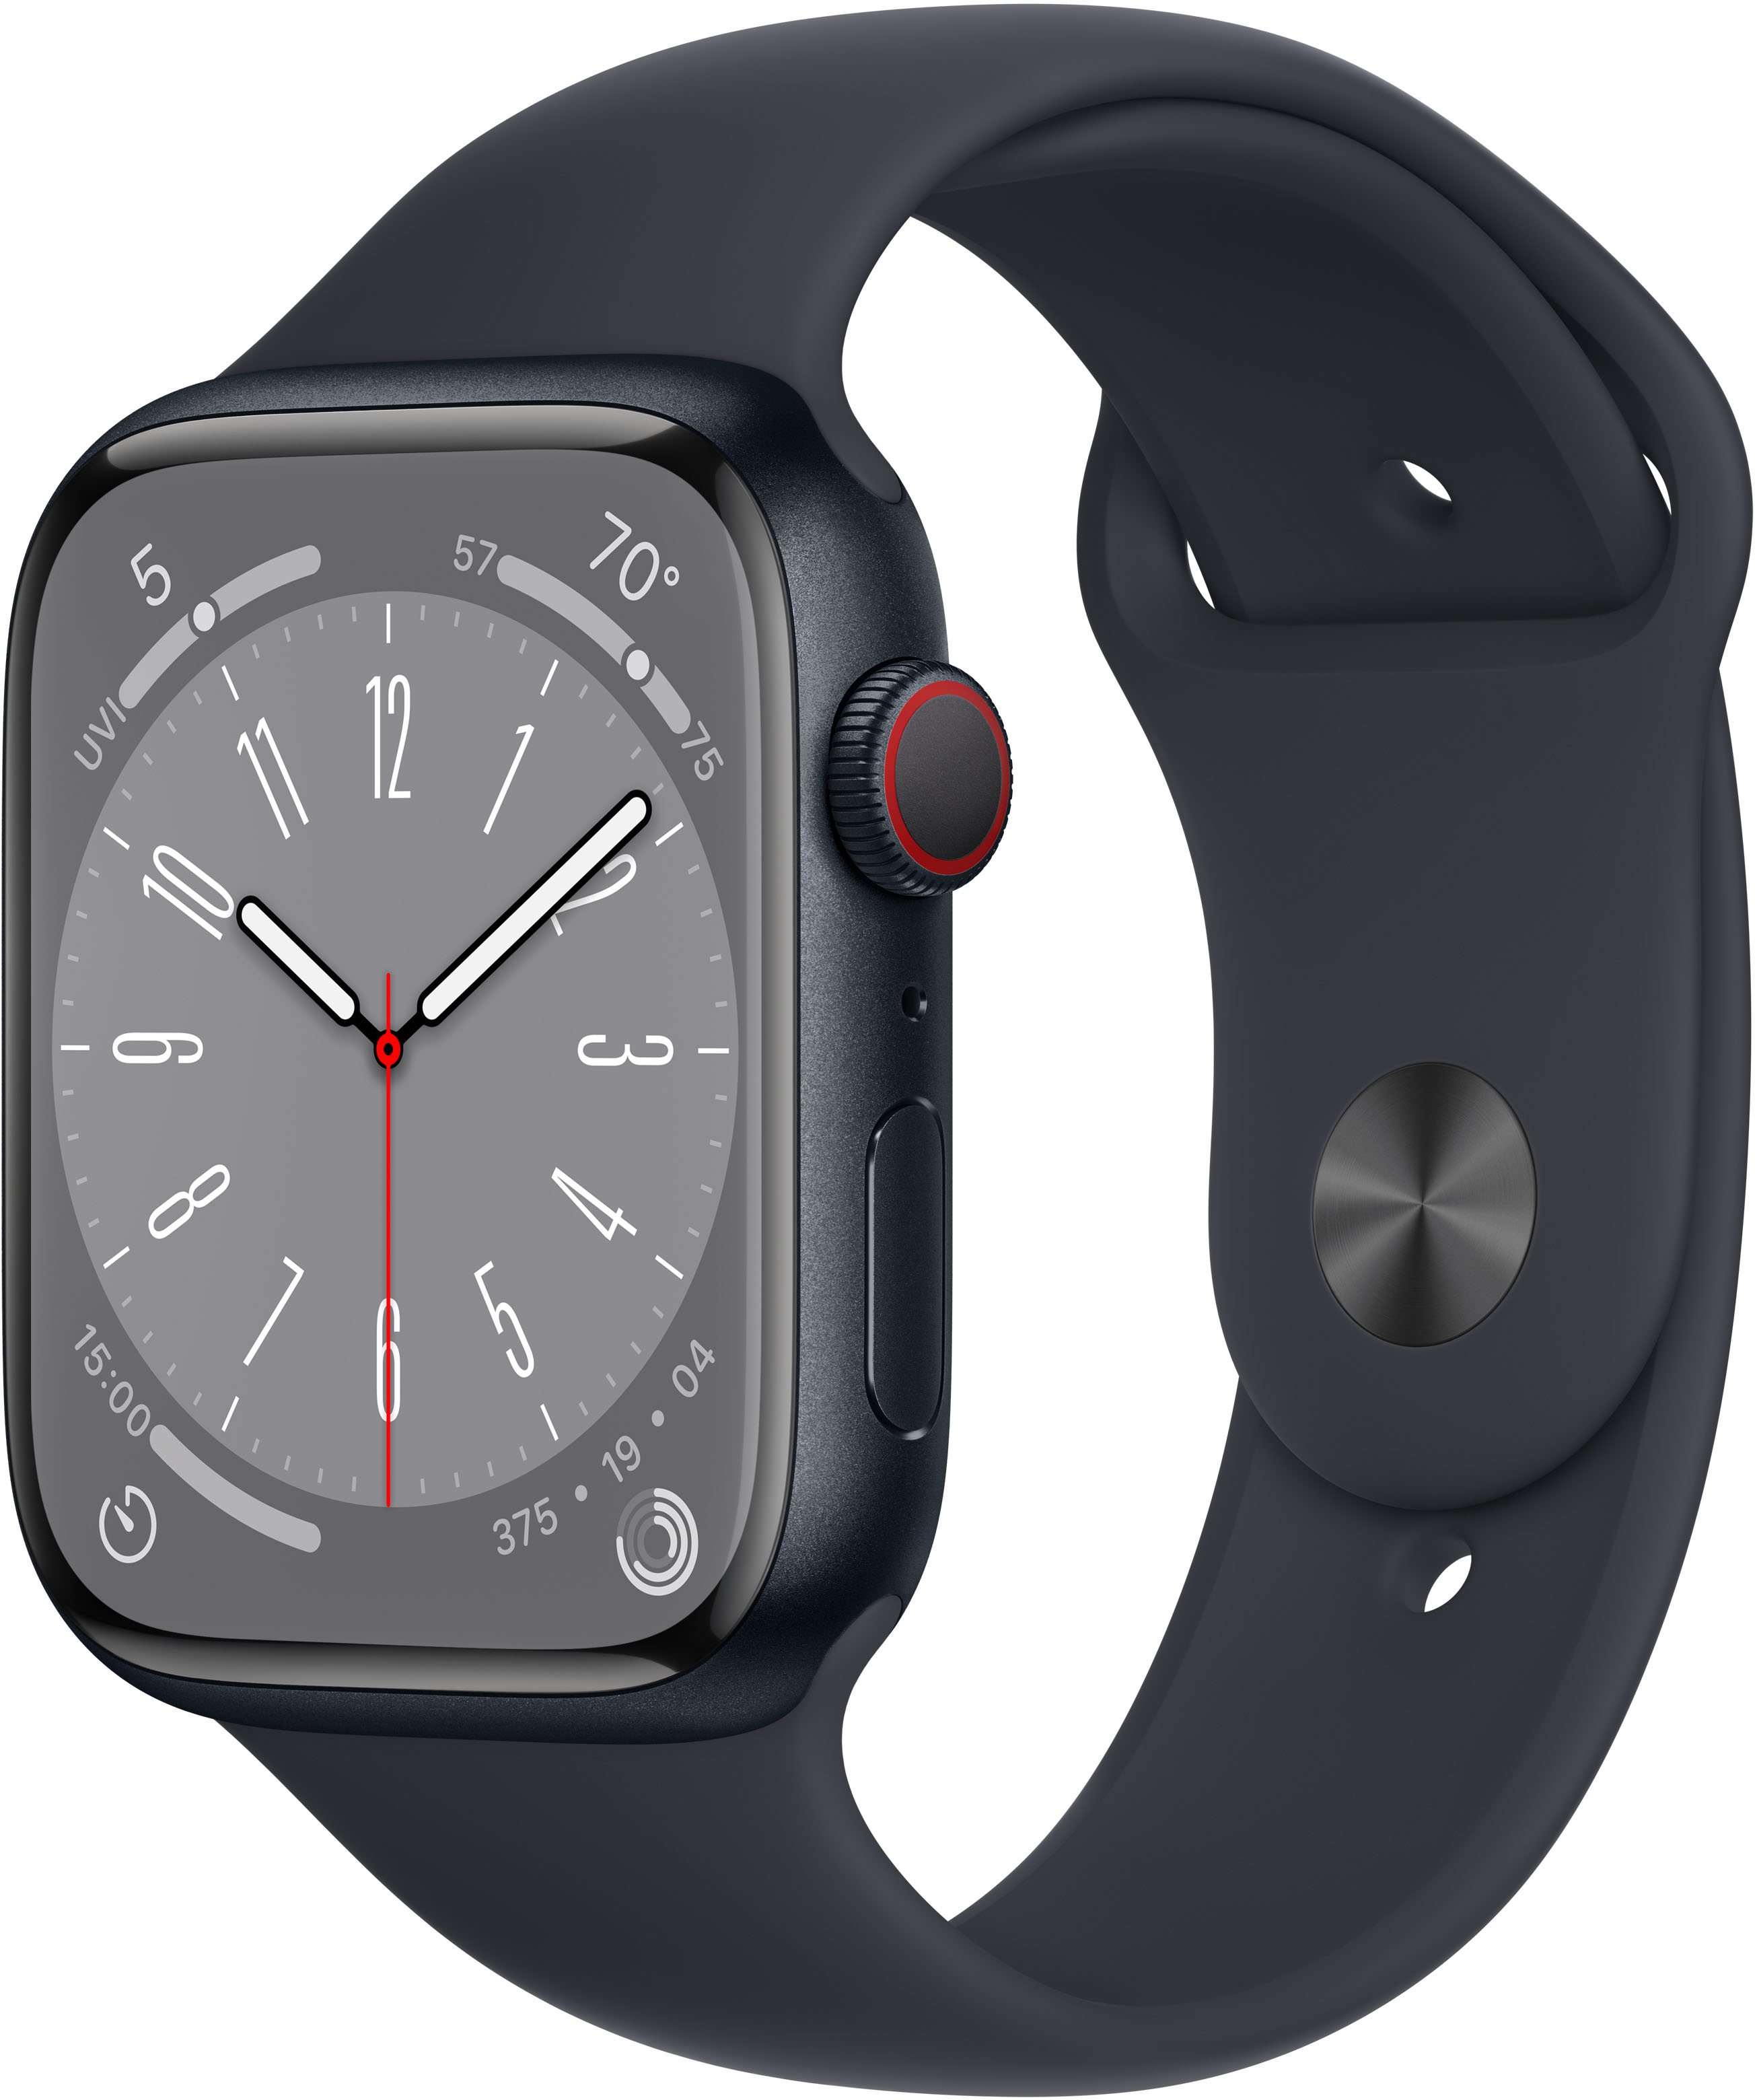 Apple Watch Series 8 (GPS + Cellular 45mm) Aluminum version deal saves you $79 at Best Buy